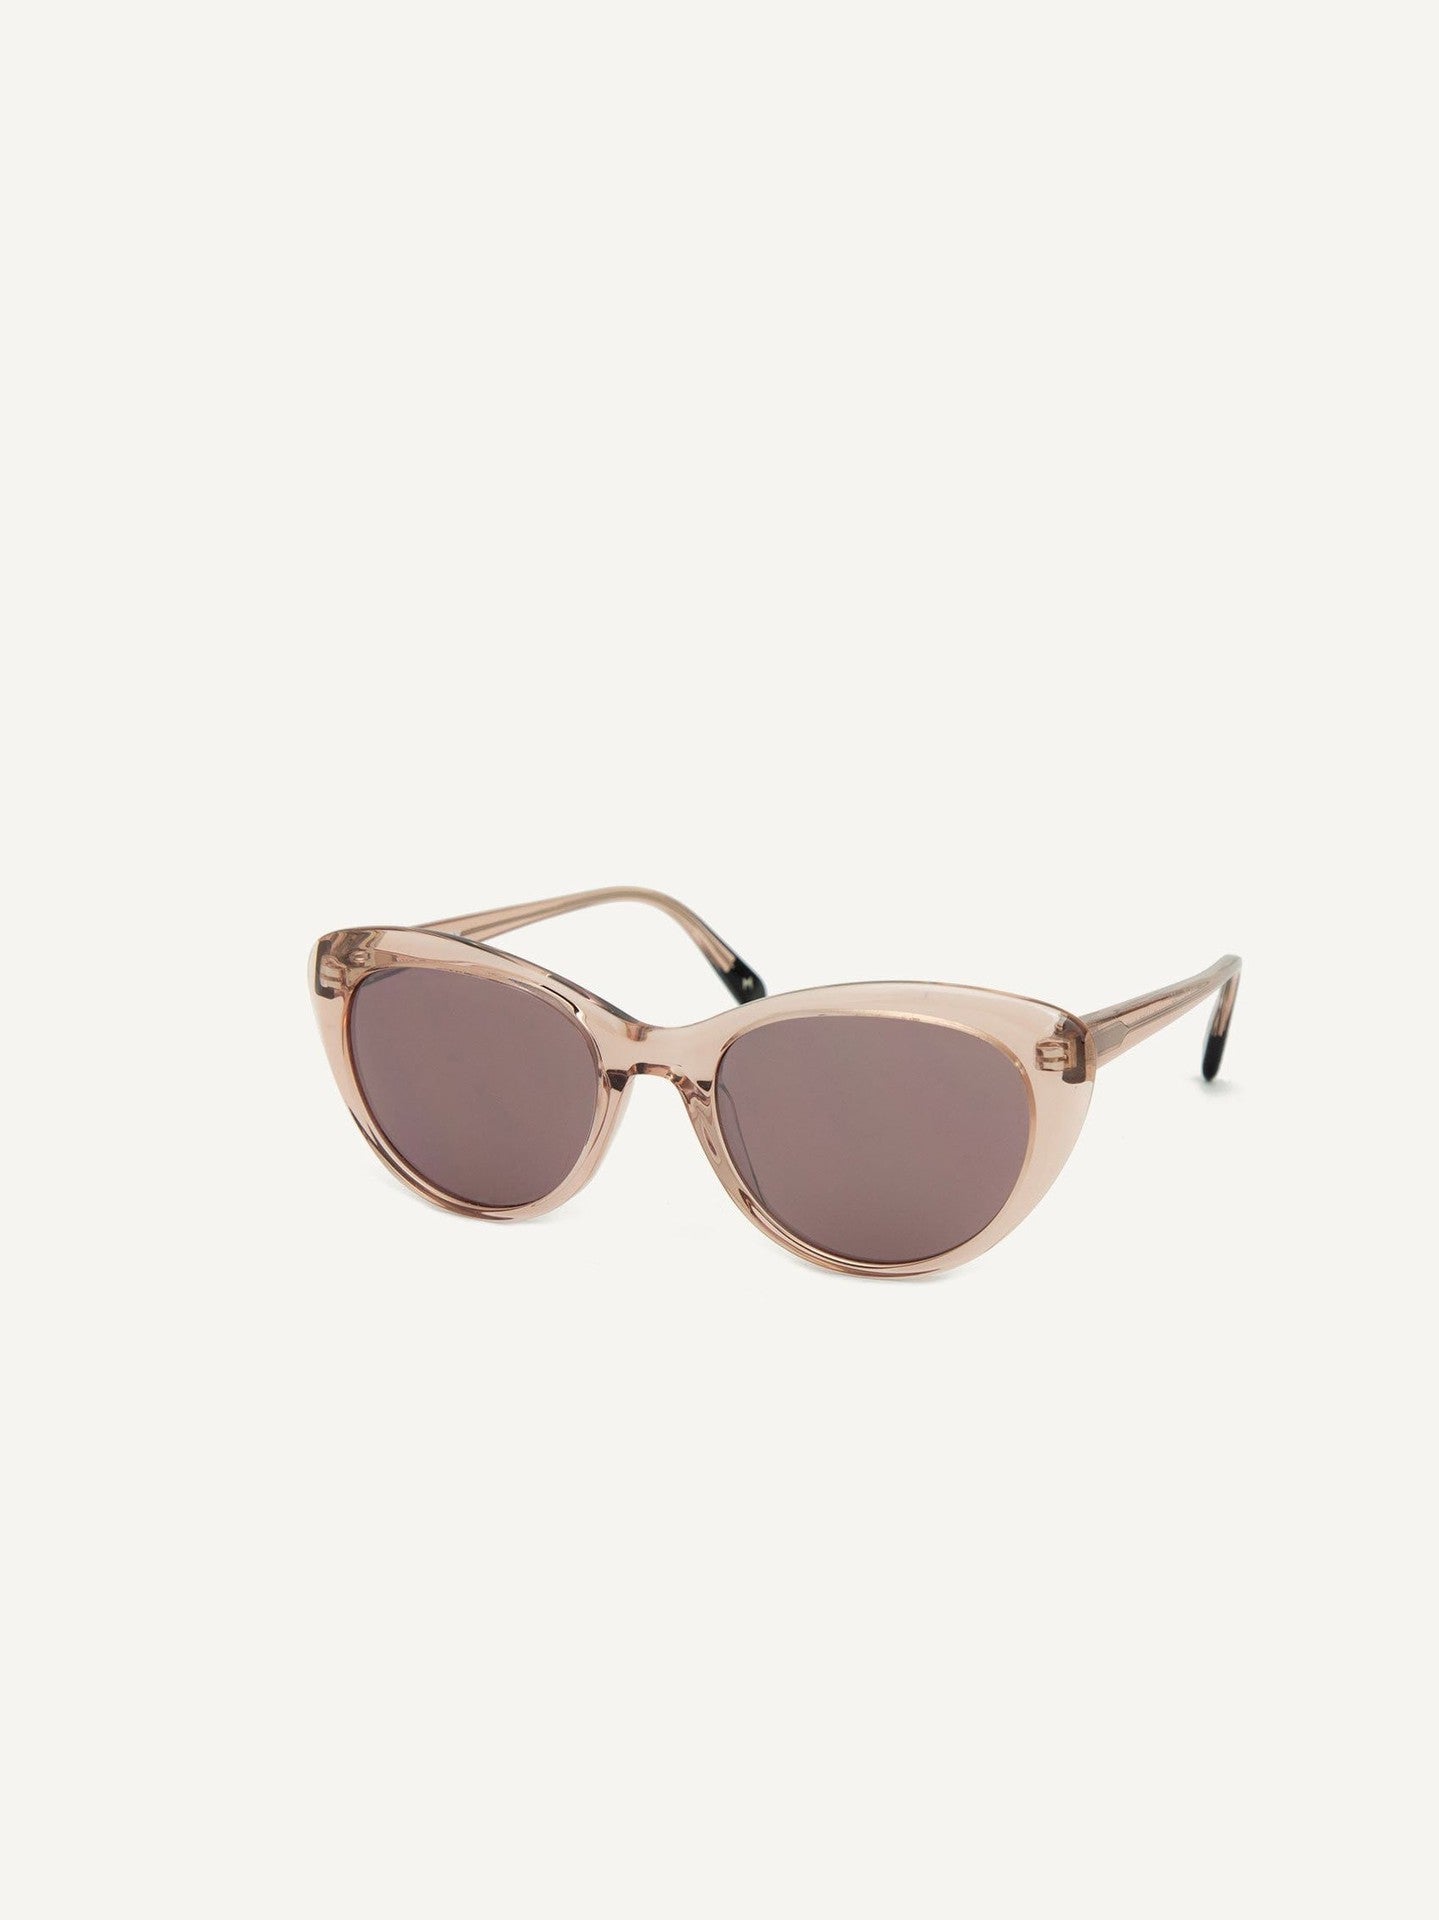 A pair of Montpellier Sunglasses – Pale Rose by Dick Moby on a white background.